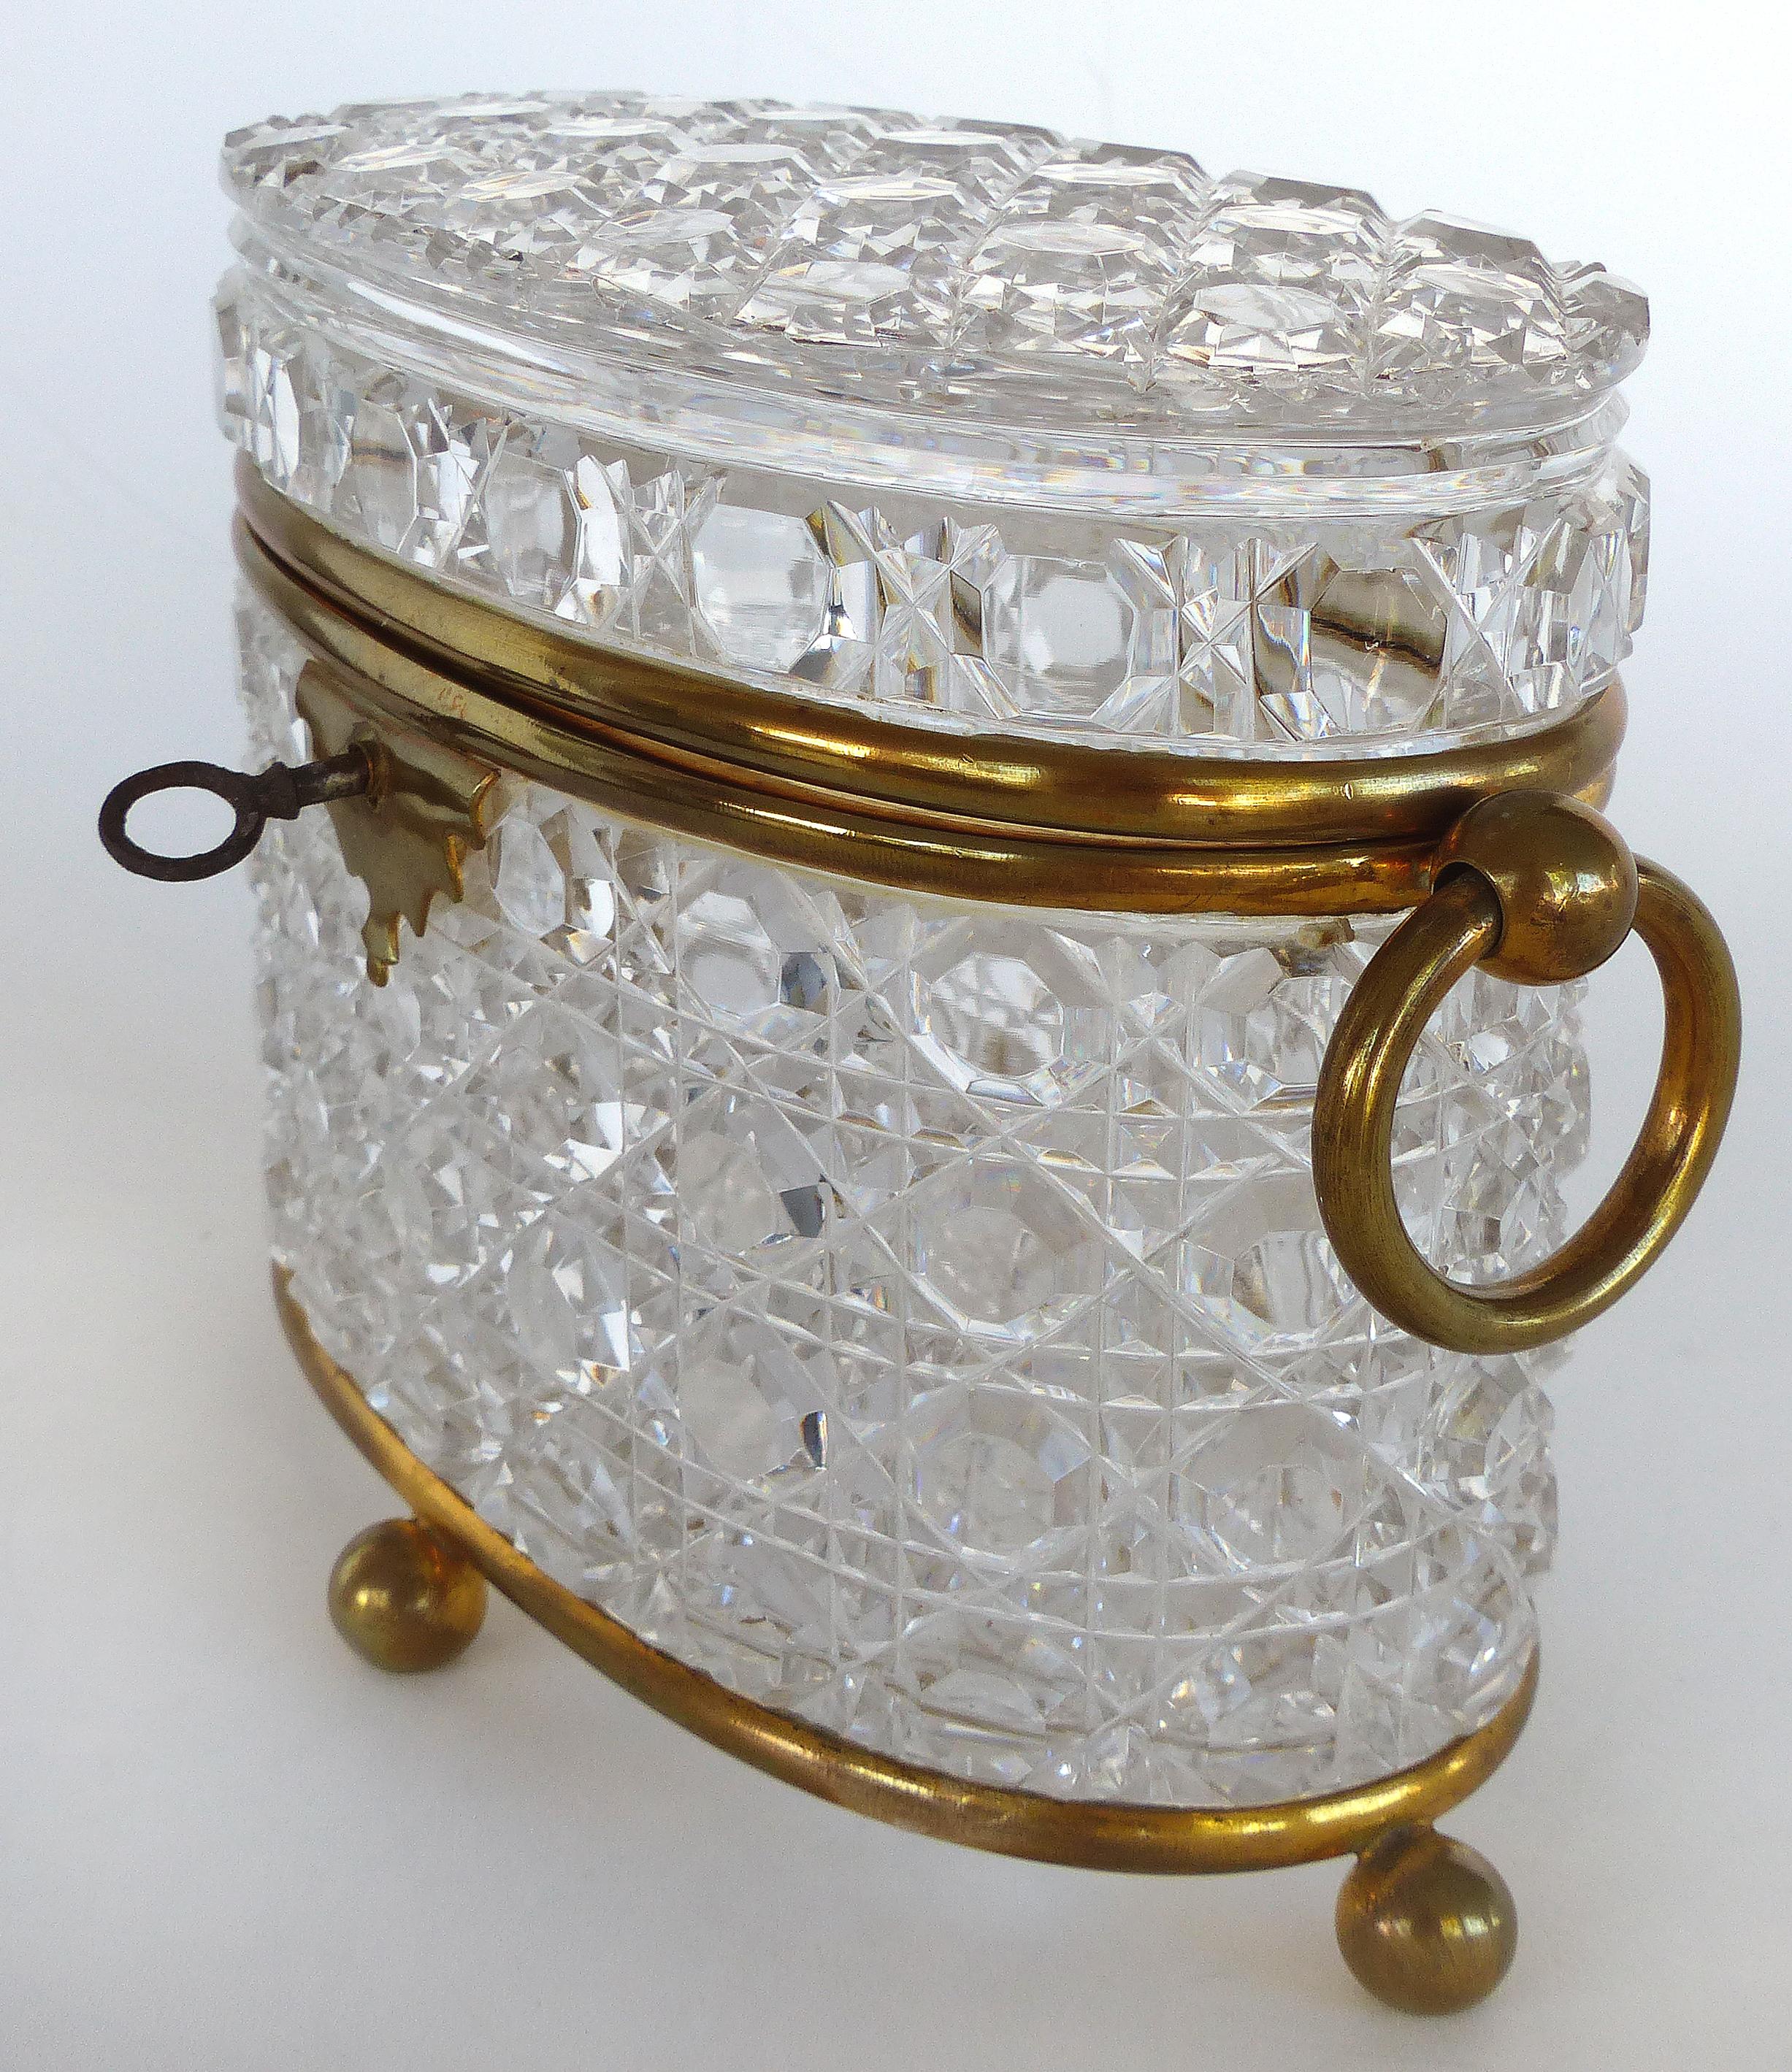 Antique Baccarat Cut Crystal Bronze Mounted Footed Oval Box with Original Key

Offered for sale is a wonderful antique cut crystal and bronze box attributed to Baccarat. The oval shaped box is mounted and supported by bronze ball feet and has a lock